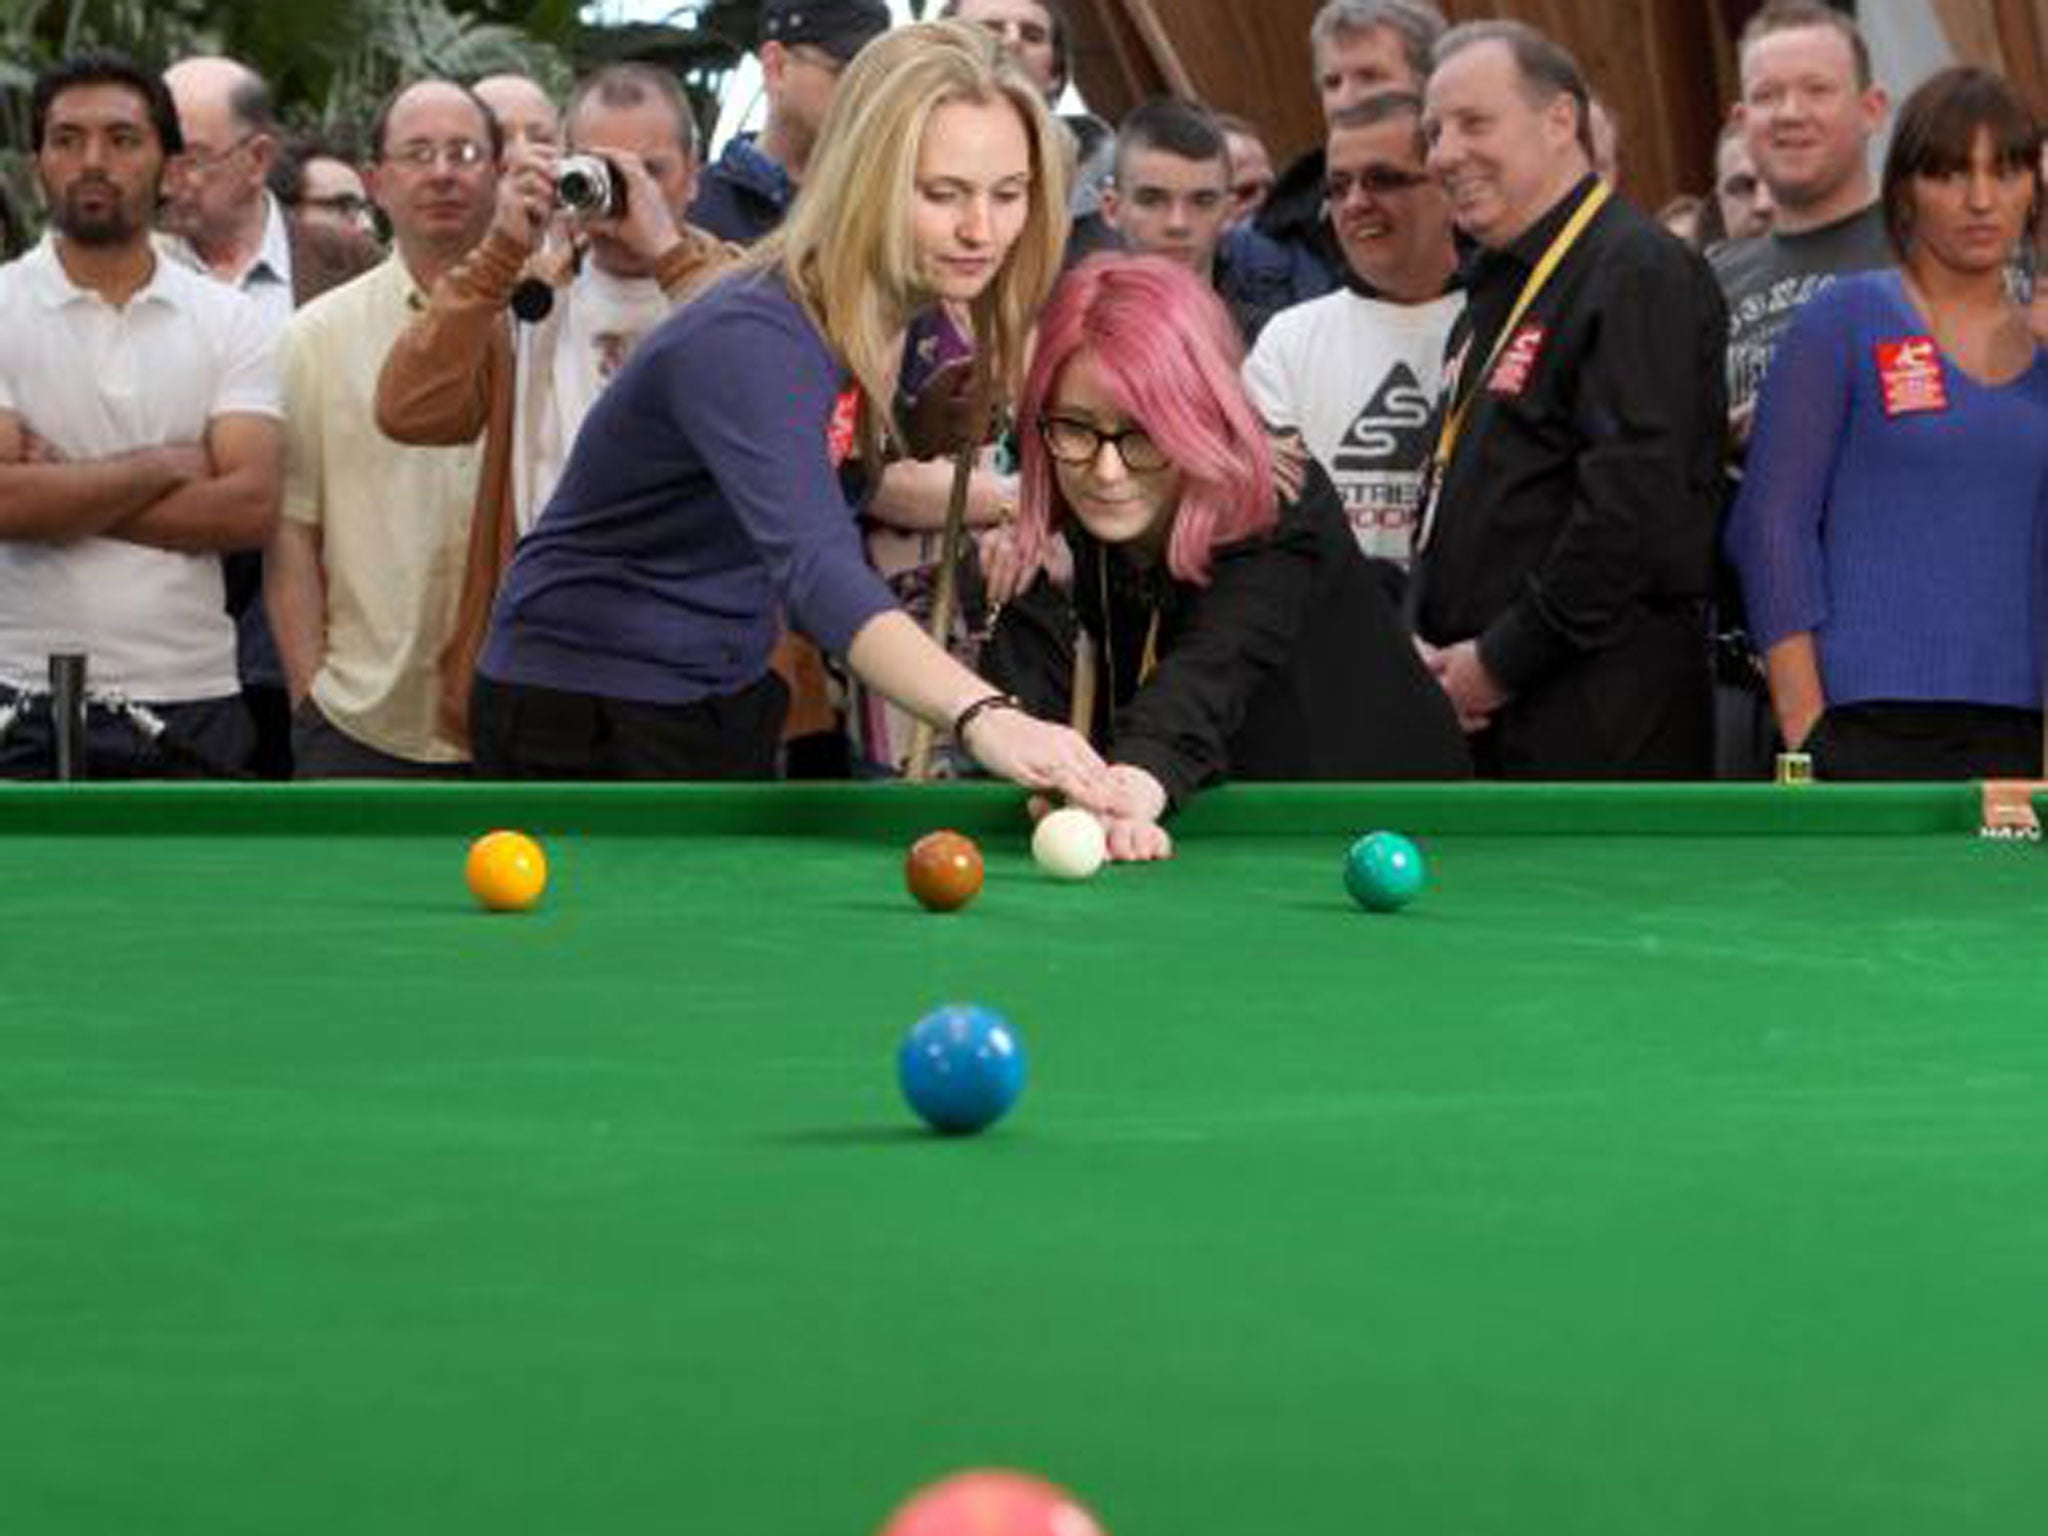 Reanne Evans and Chloe Hamilton, right, get a grip at World Snooker’s Ladies Day